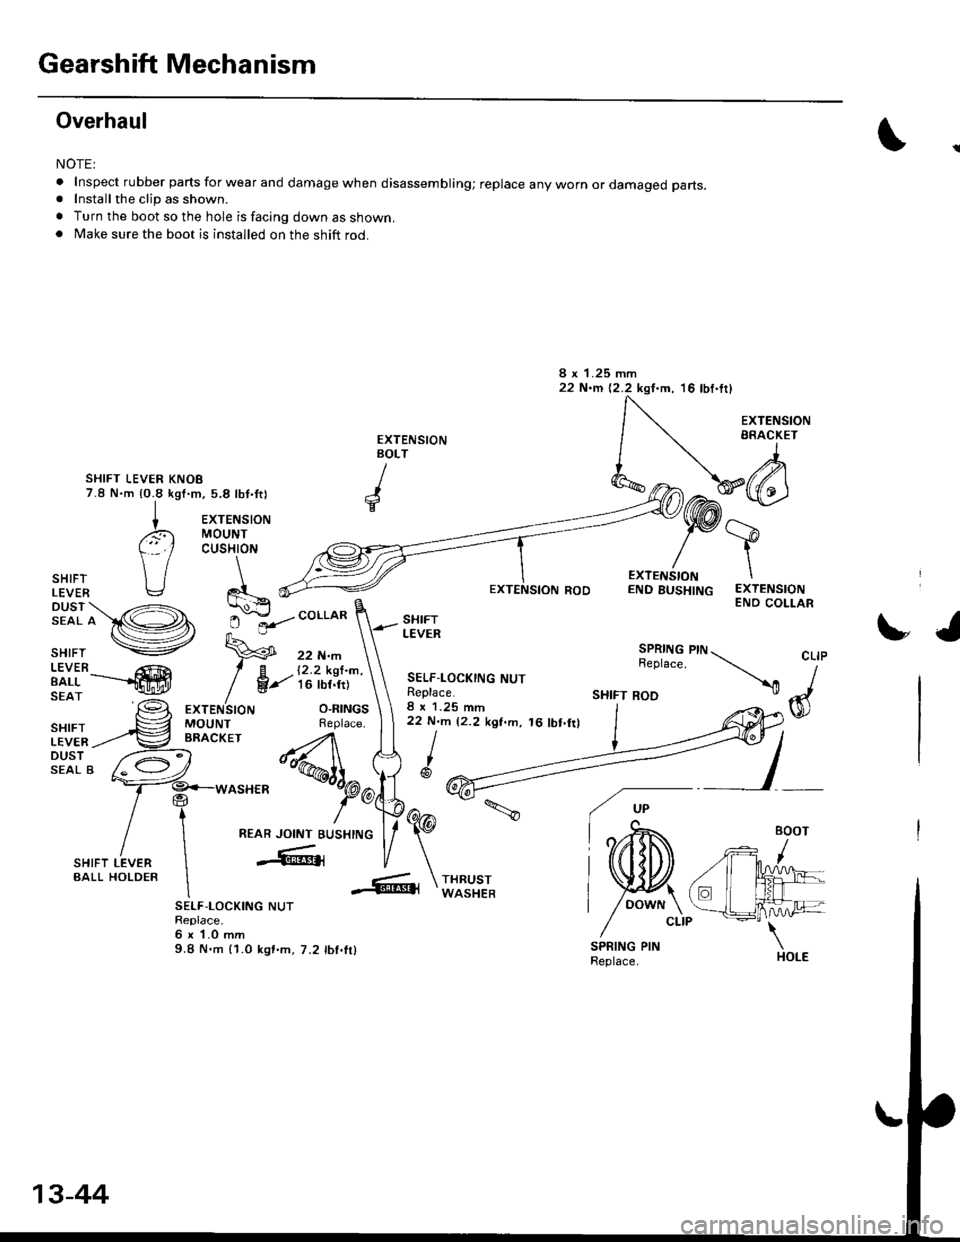 HONDA CIVIC 1996 6.G Workshop Manual Gearshift Mechanism
Overhaul
NOTE:
.Inspectrubberpartsforwearanddamagewhendisassembling;replaceanywornordamagedparts.
. Install the clip as shown.
. Turn the boot so the hole is facing down as shown..